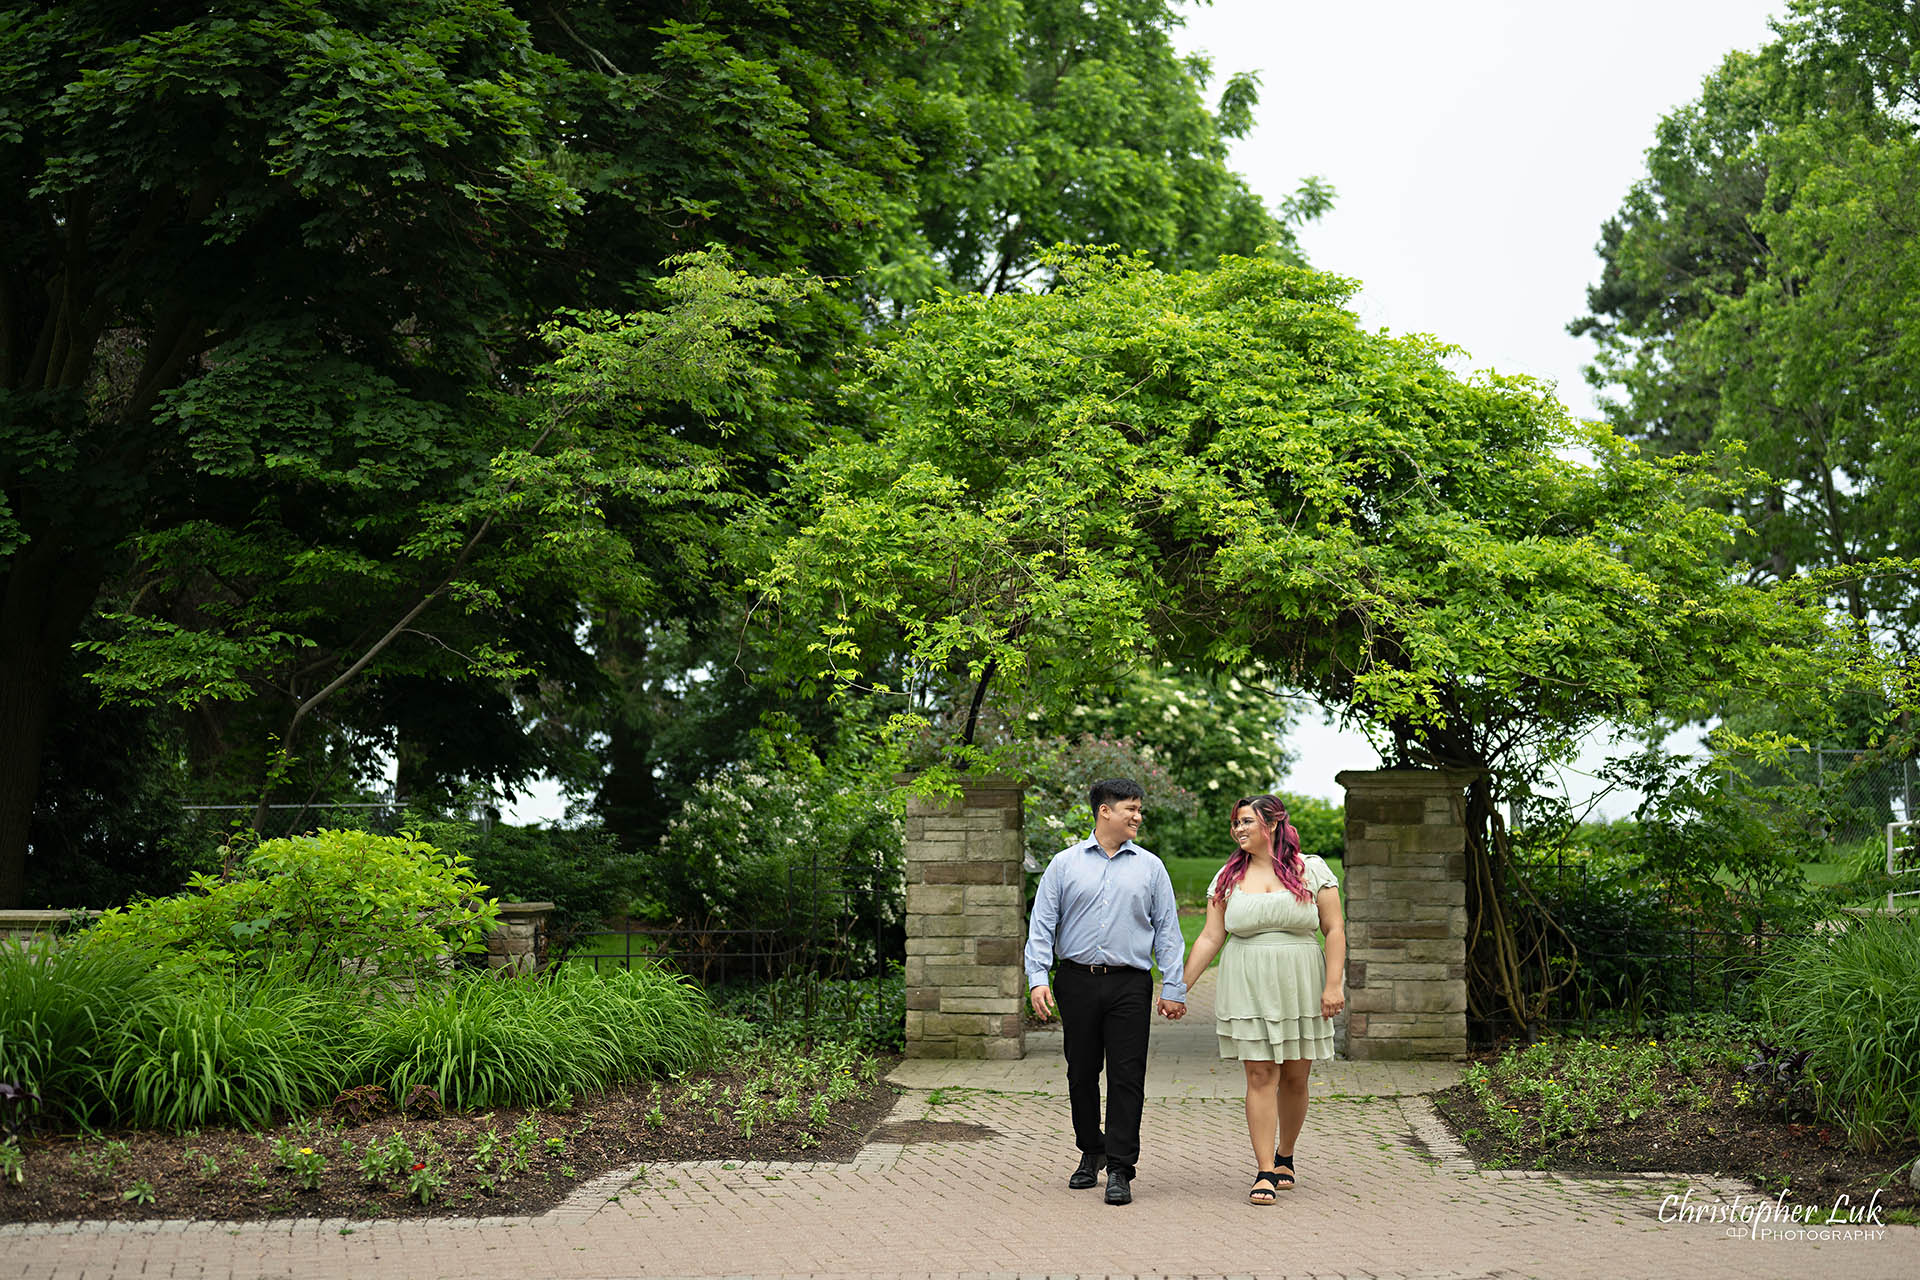 Adamson Estate Tree Leaves Ivy Arch Gate Bride Groom Holding Hands Walking Together Candid Organic Natural Photojournalistic Landscape 